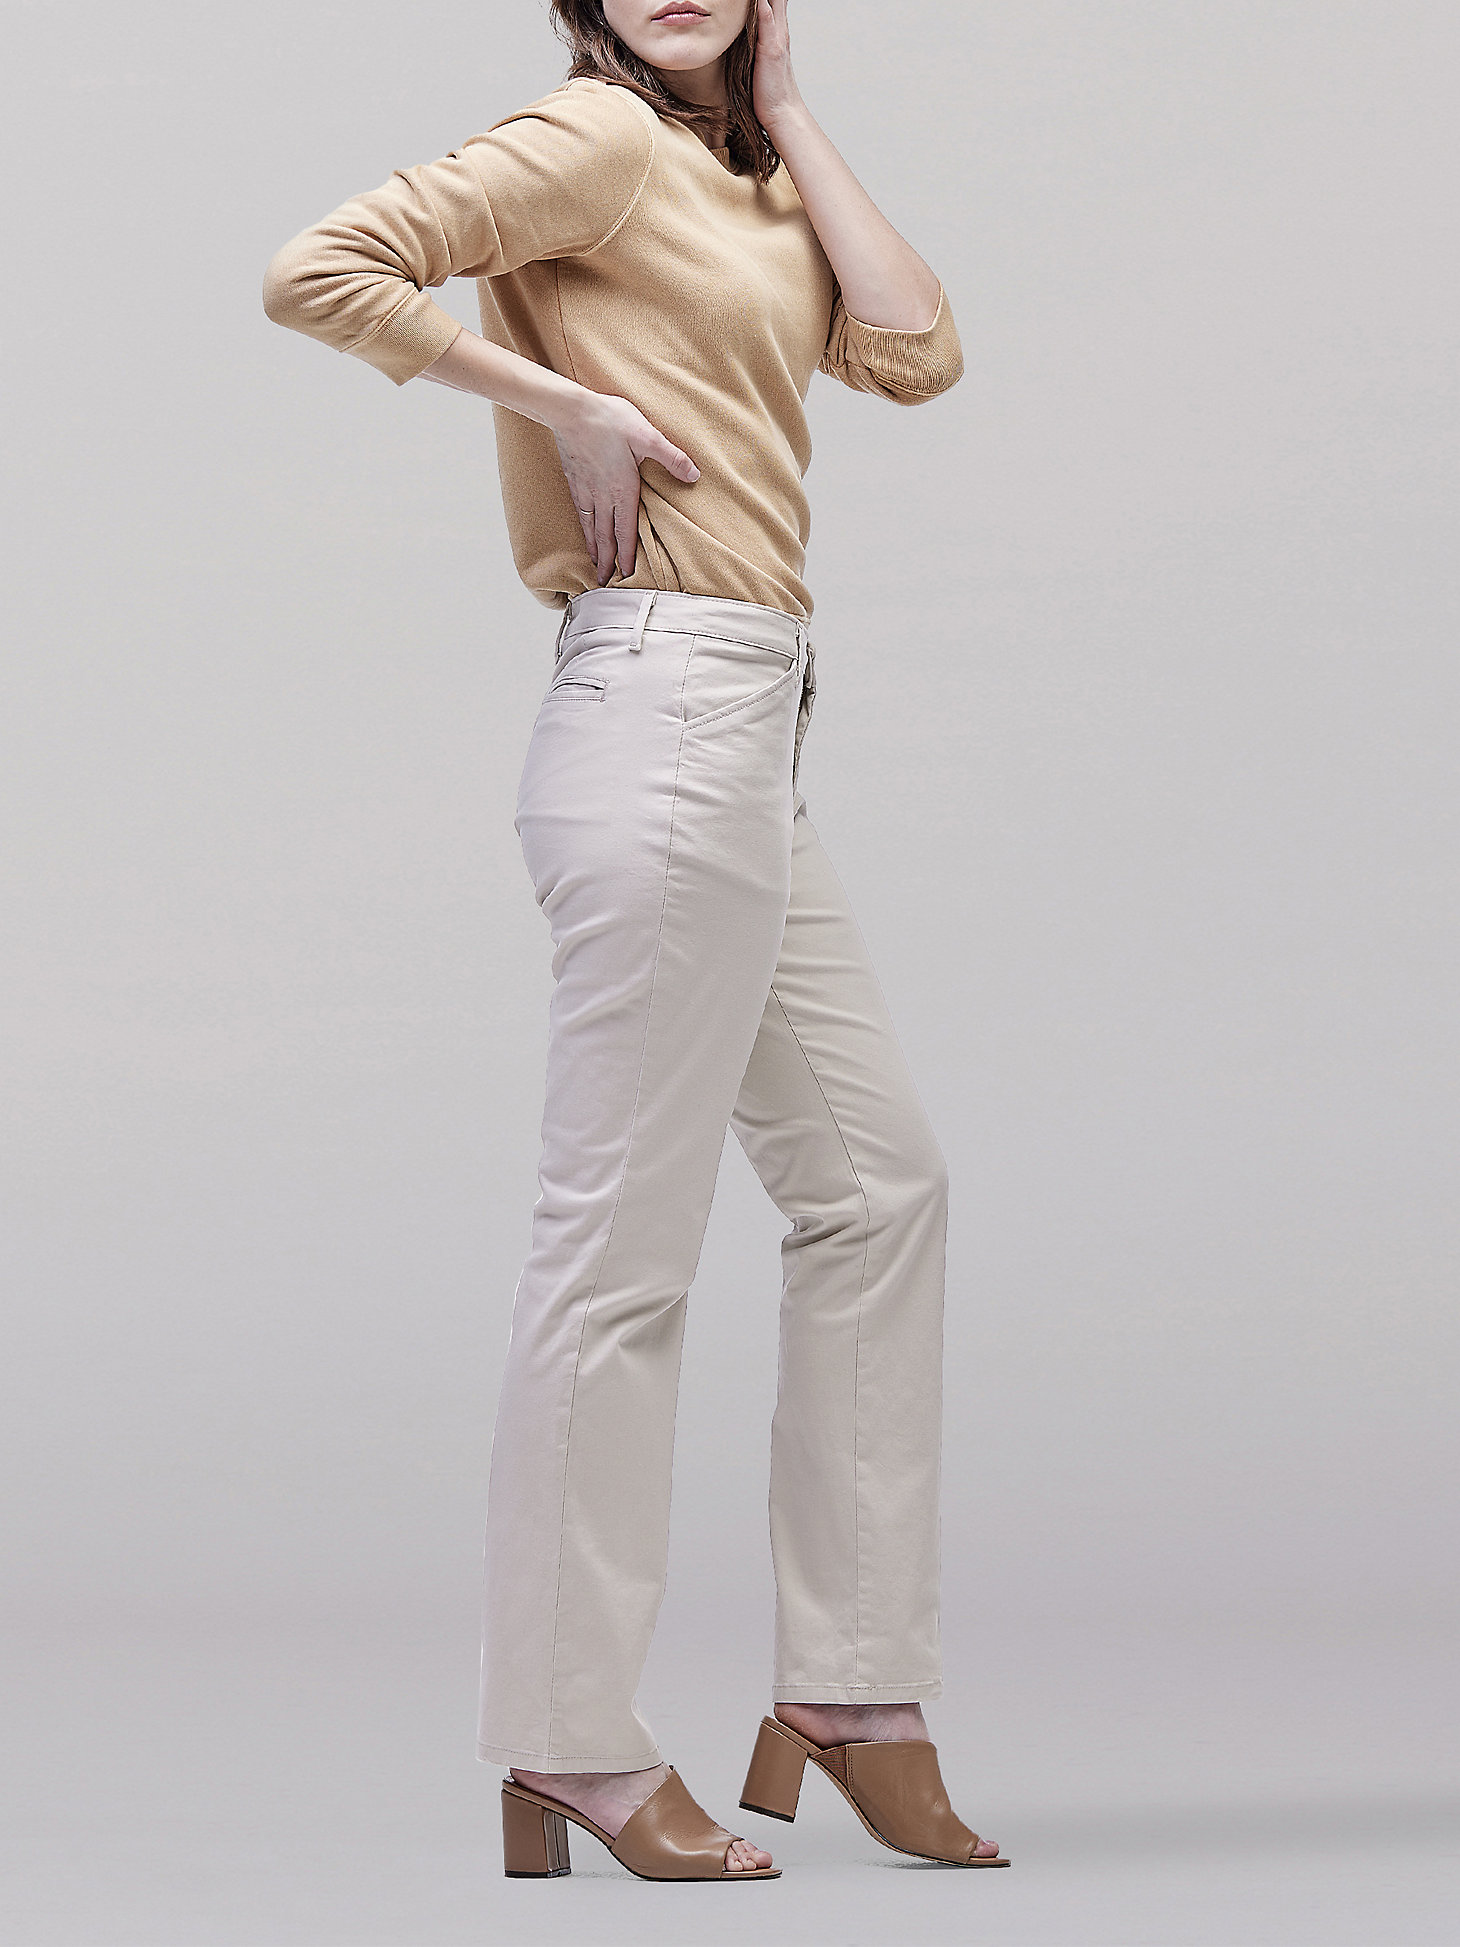 Women’s Relaxed Fit Straight Leg Pant (All Day Pant) in Parchment alternative view 2